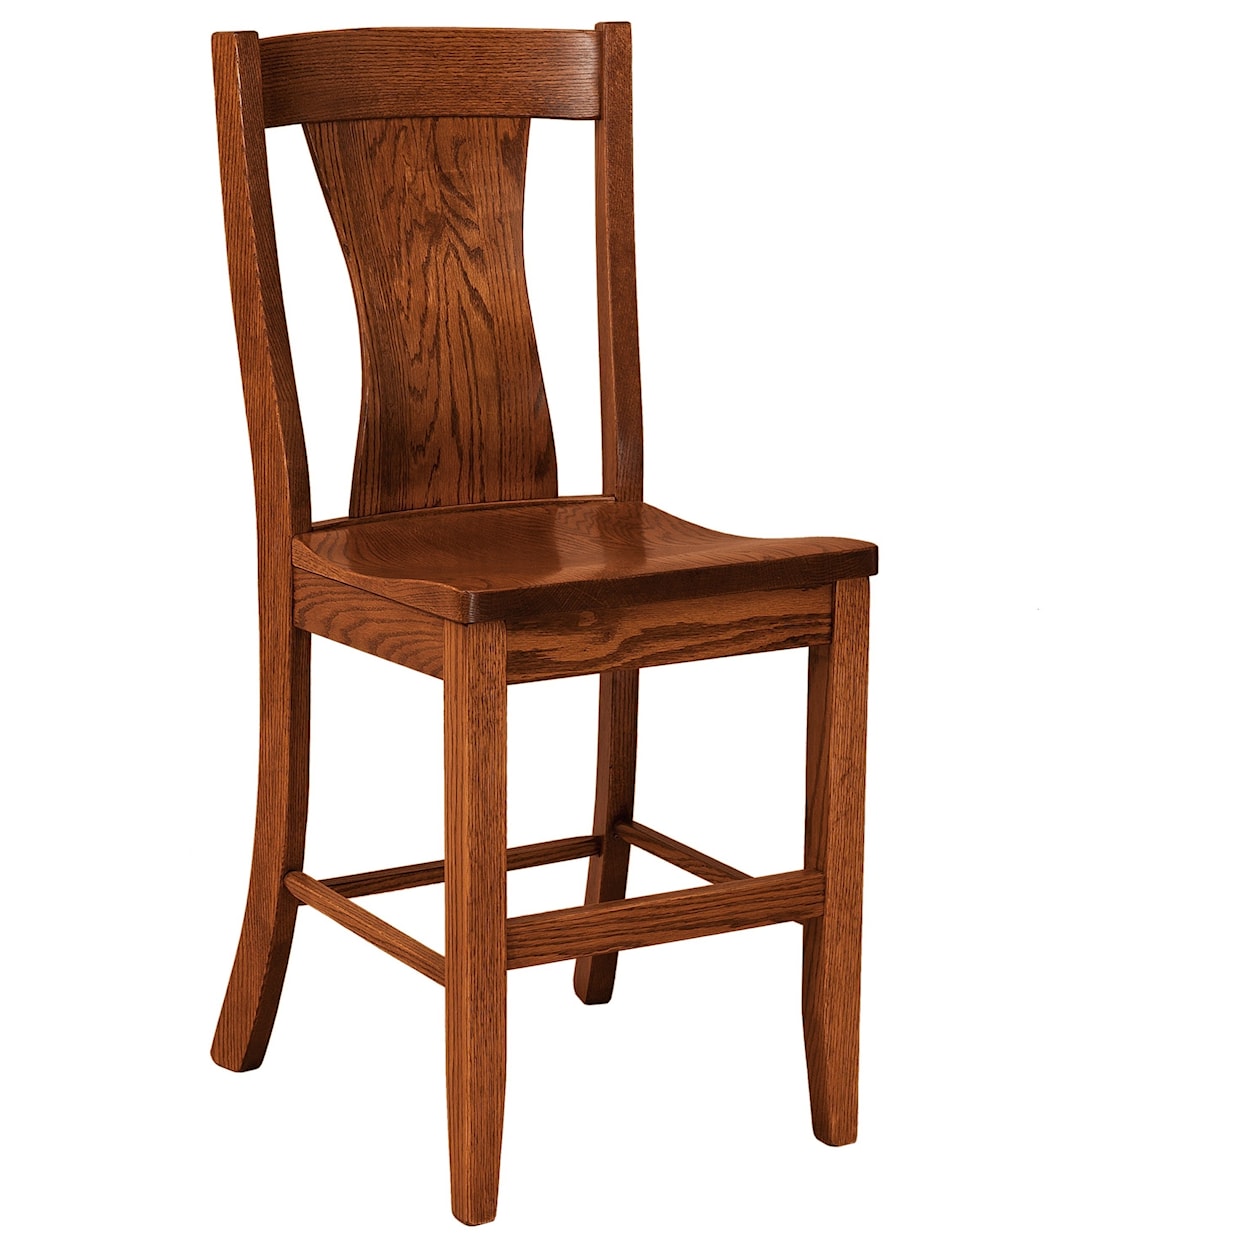 F&N Woodworking Westin Stationary Bar Height Stool - Fabric Seat